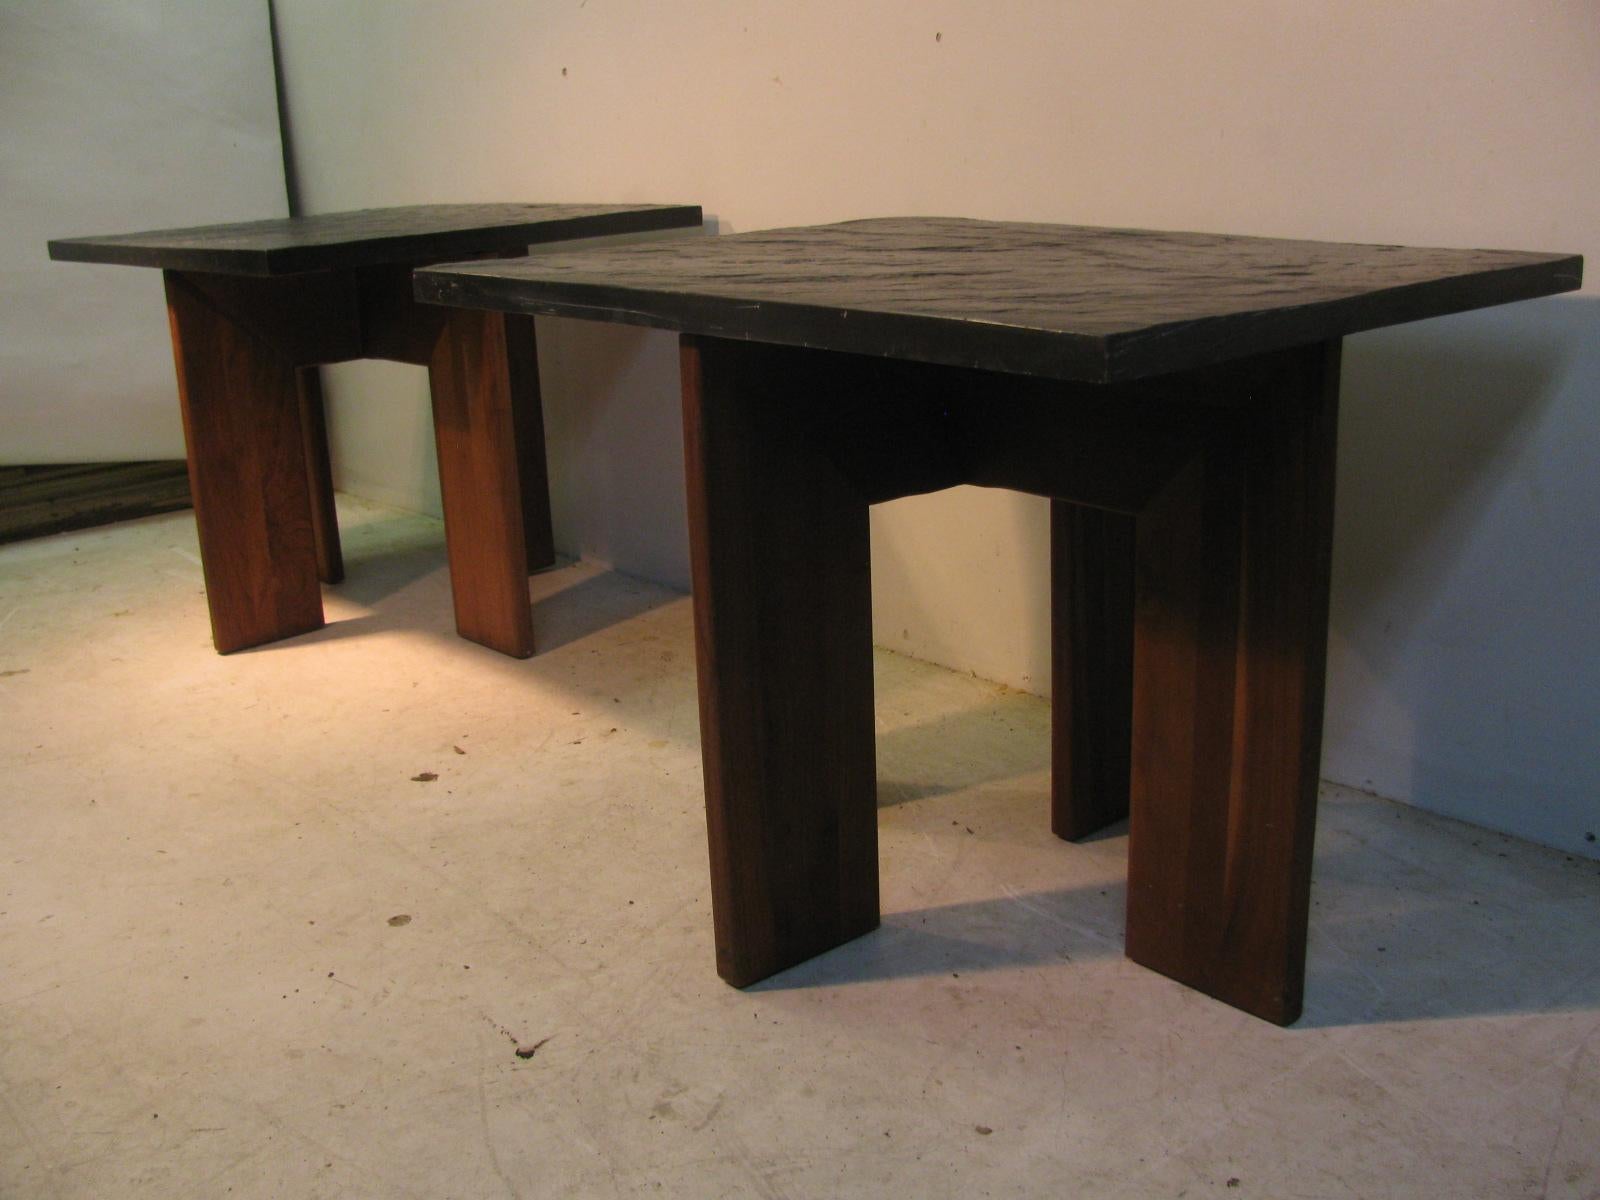 Fabulous pair of walnut base tables with slate stone tops. Simple and elegant in their nature, these tables are hard to come by. In very good condition with excellent color and stability.